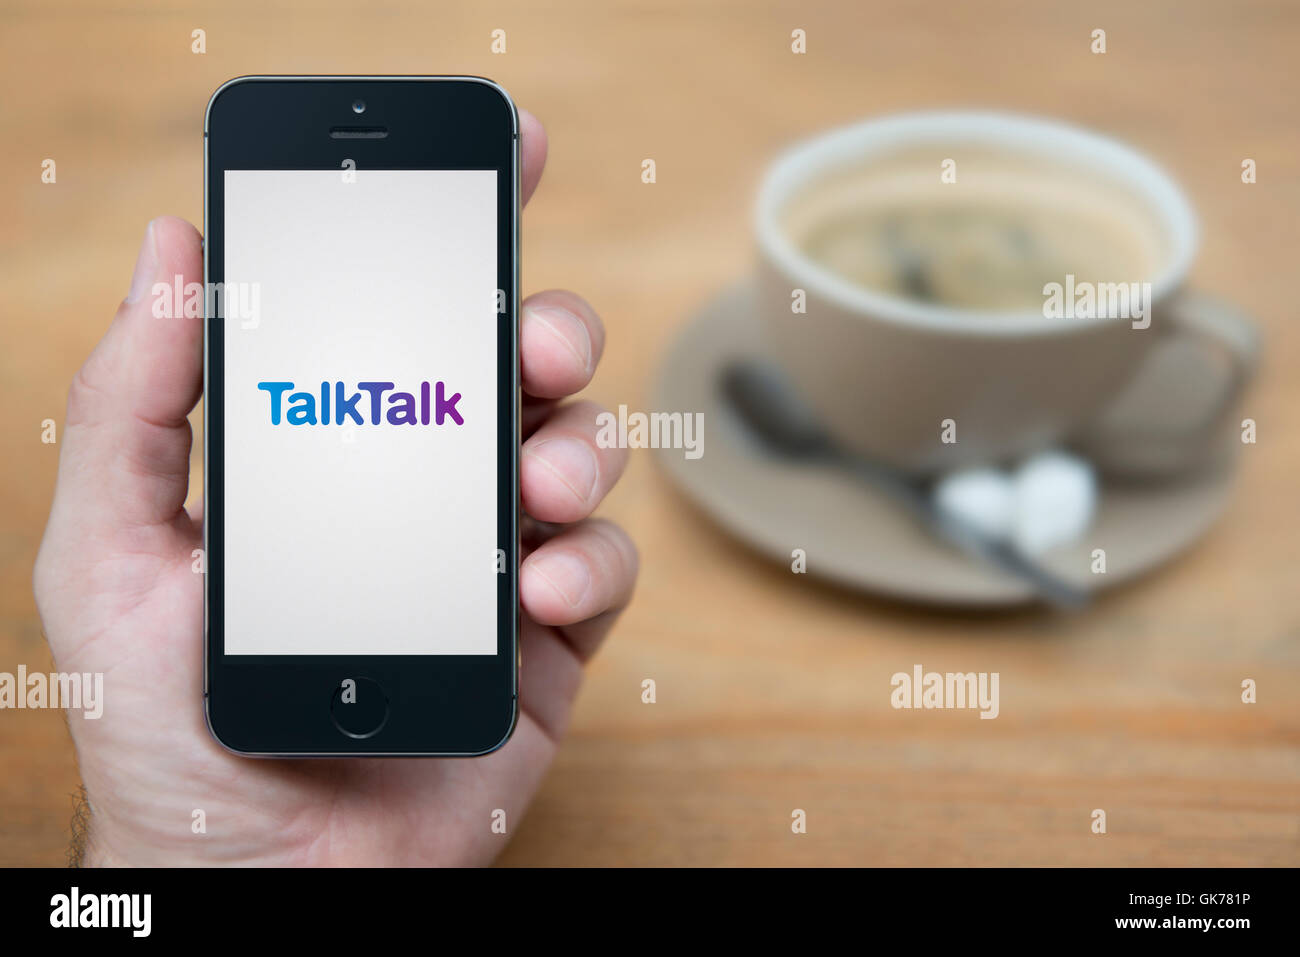 A man looks at his iPhone which displays the Talk Talk logo, while sat with a cup of coffee (Editorial use only). Stock Photo